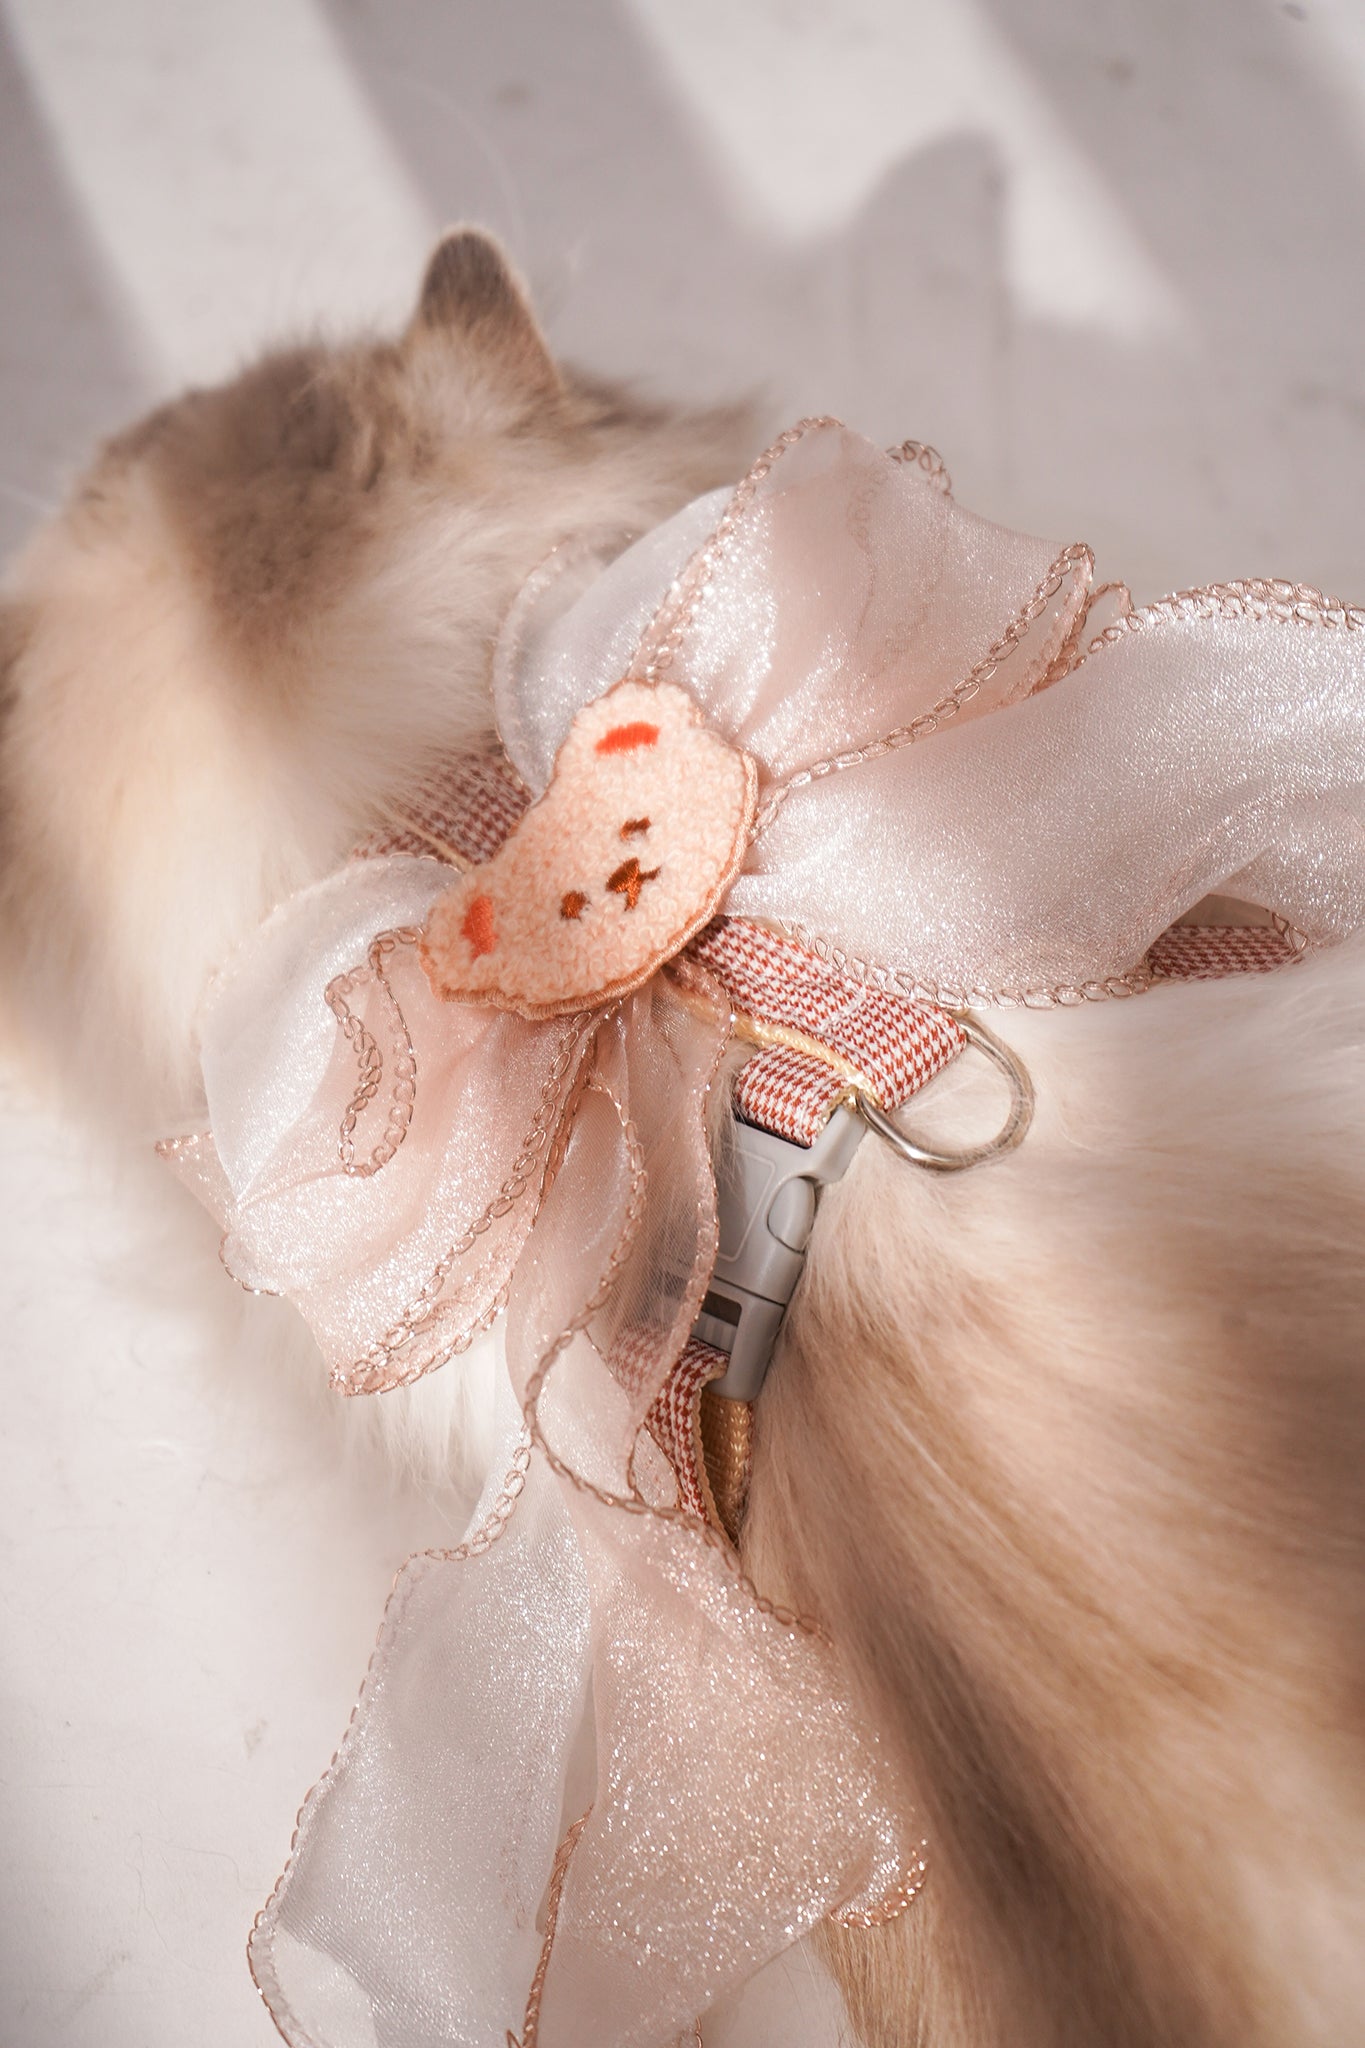 Teddy Bear Harness For Cat (leash included)